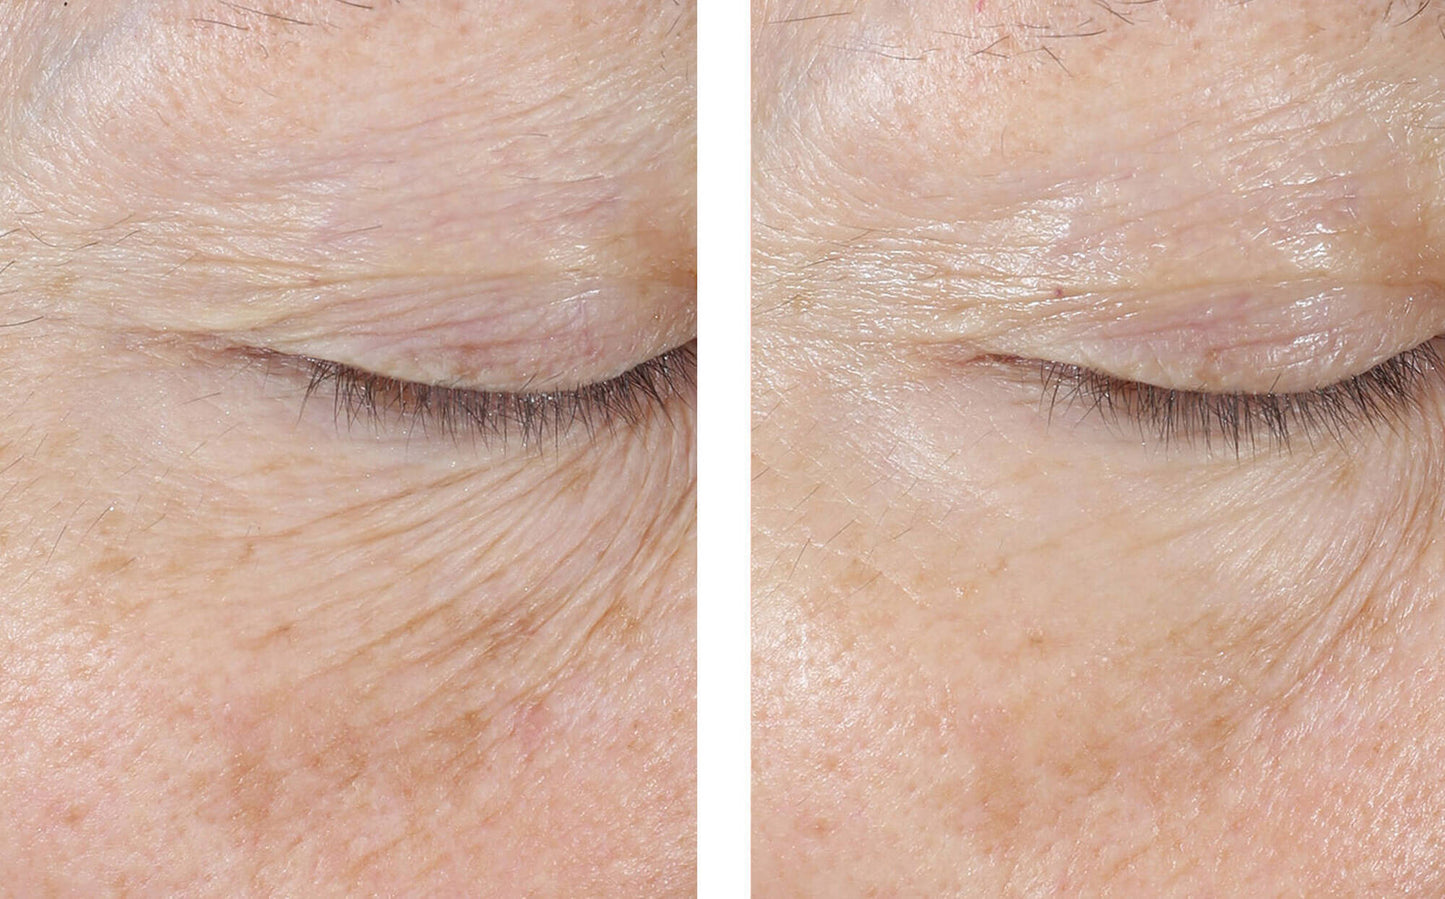 skinbetter interfuse eye cream before and after 4 weeks